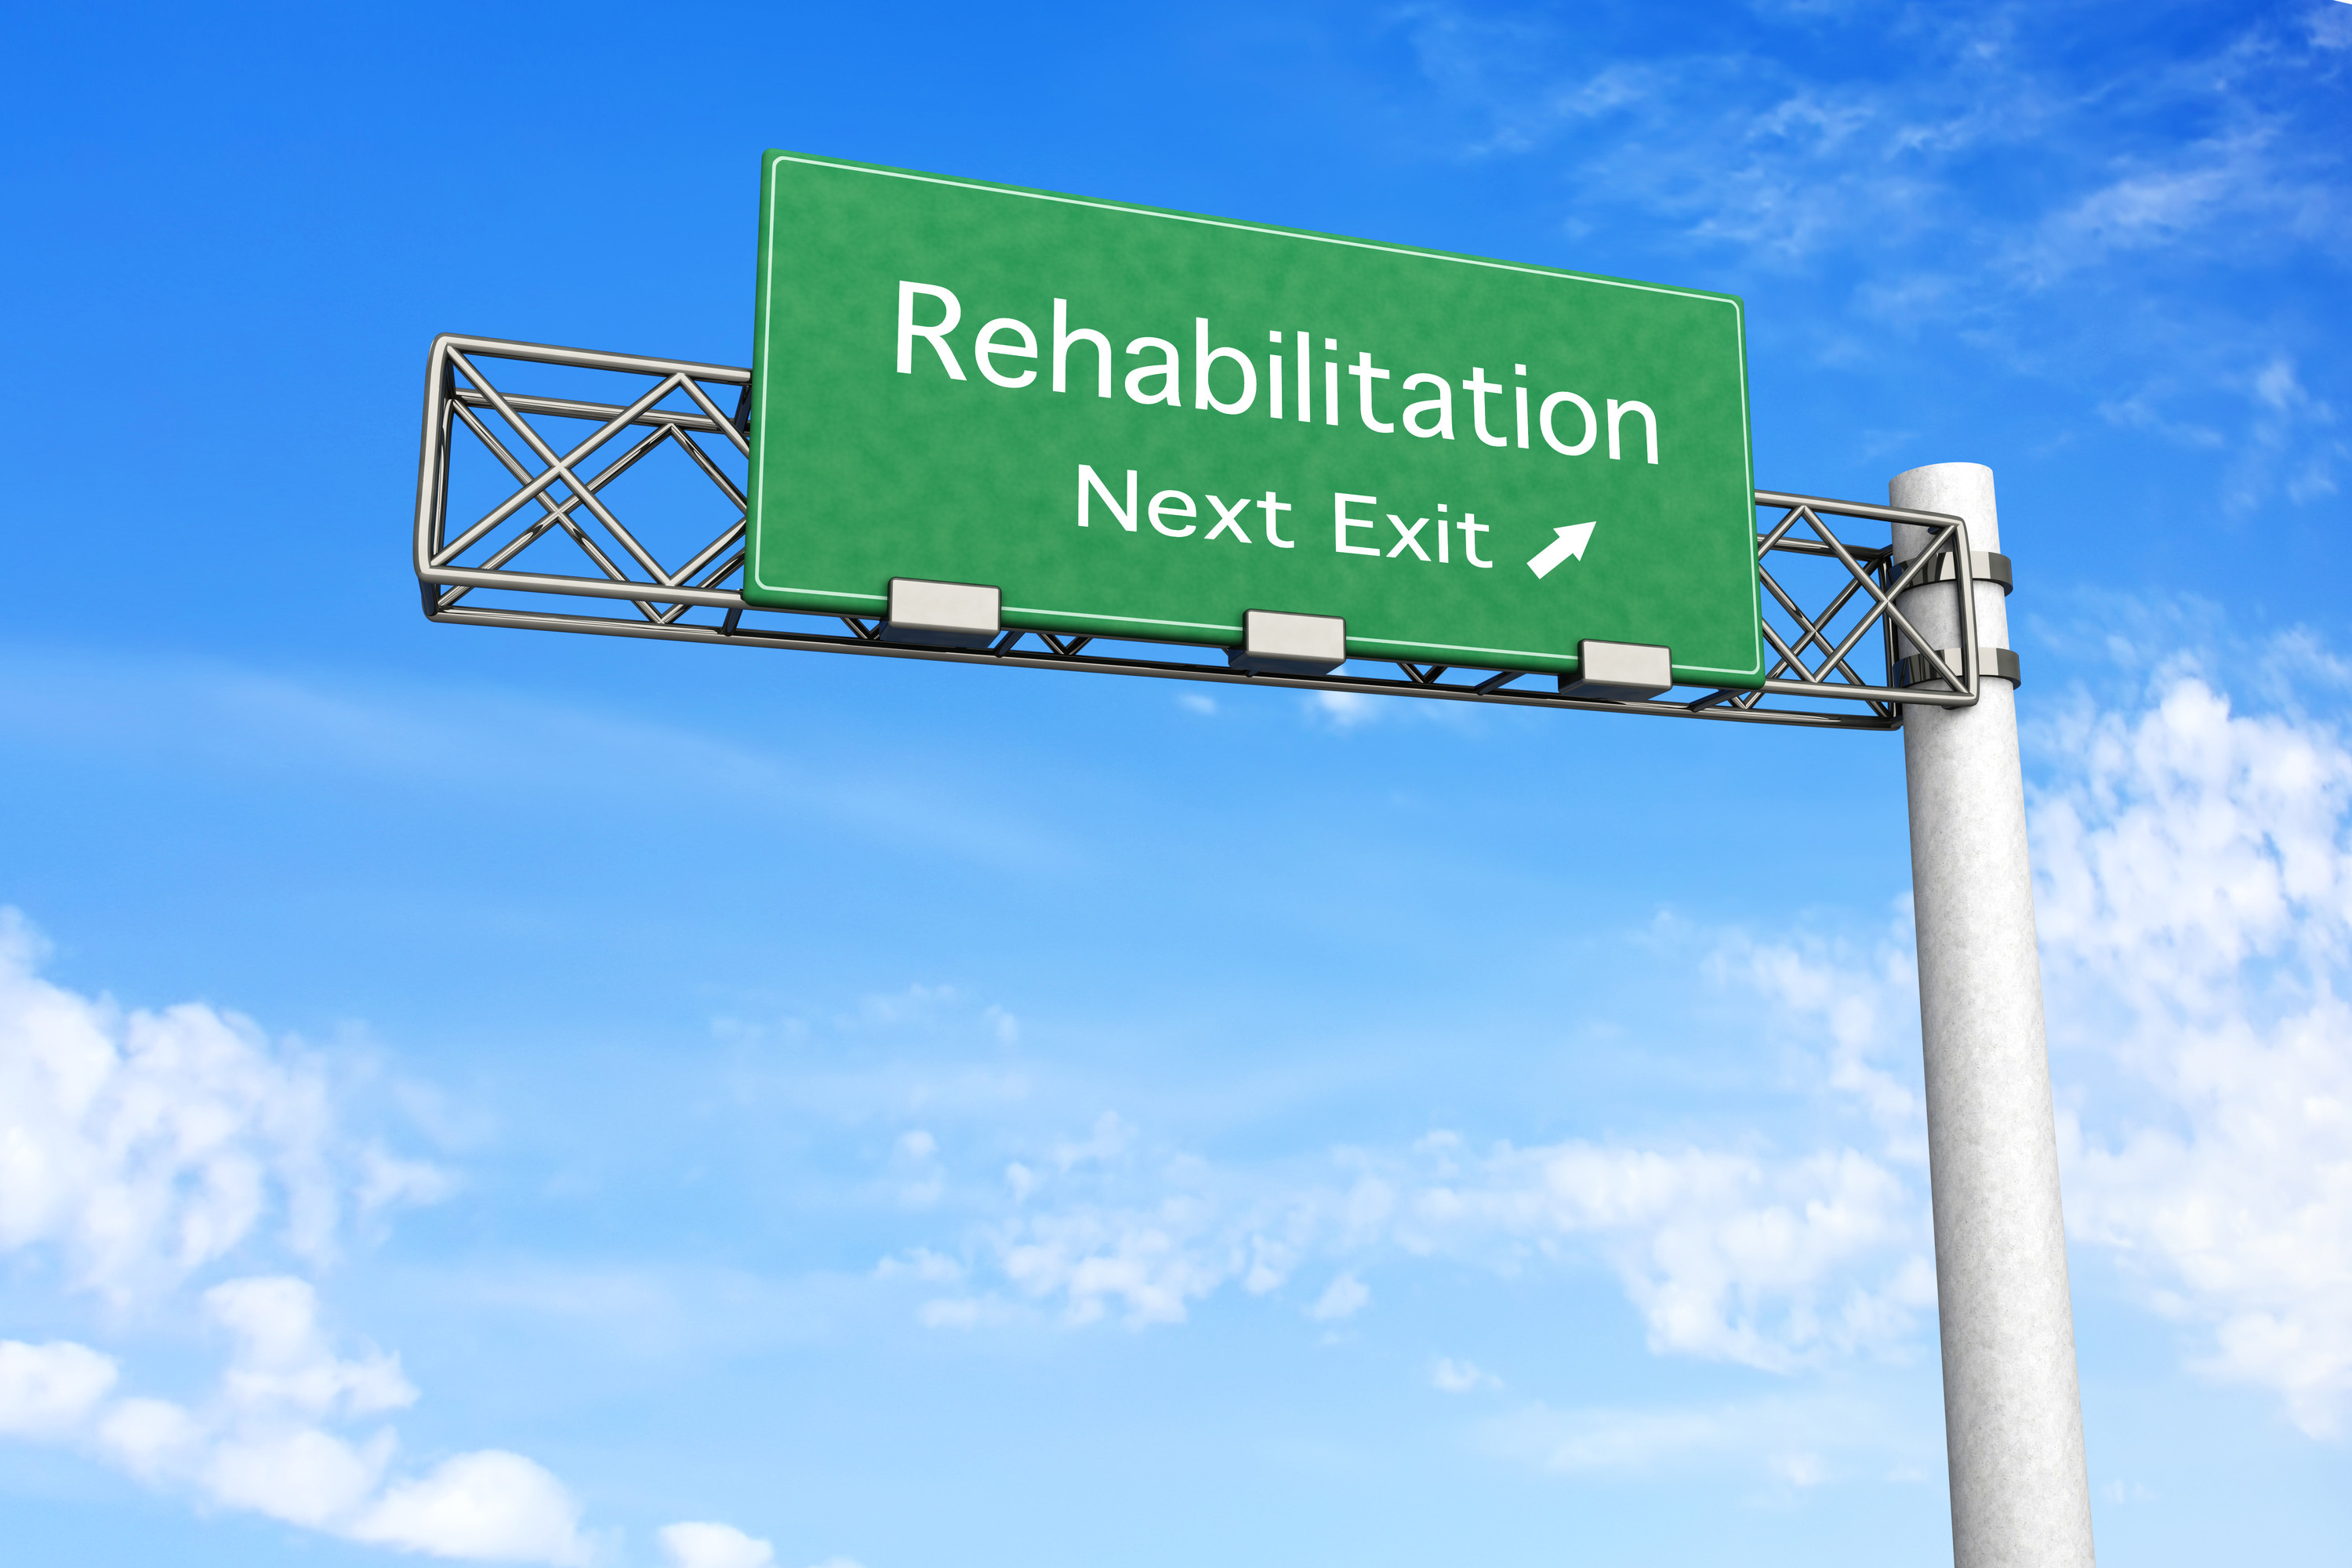 State Funded Drug Rehabs in South Carolina